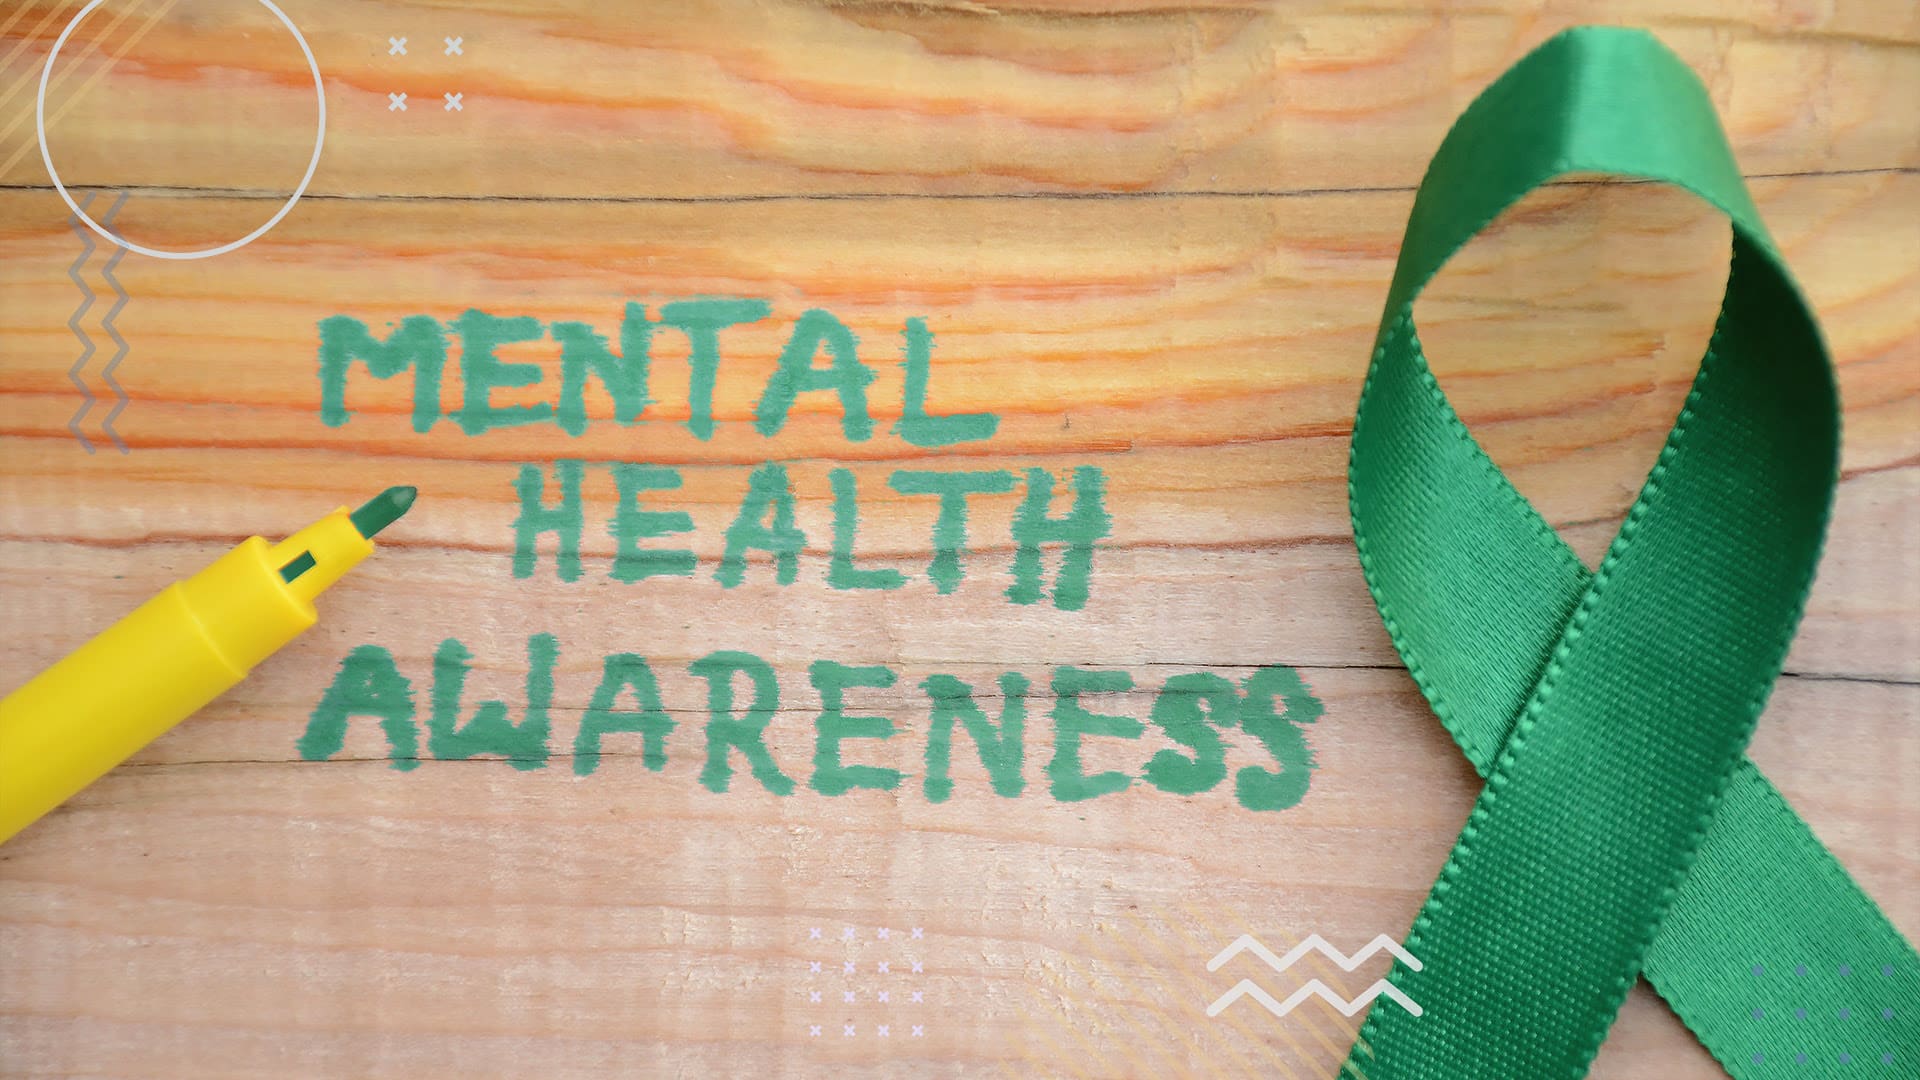 Mental health awarness fundraiser with green ribbon on wood table